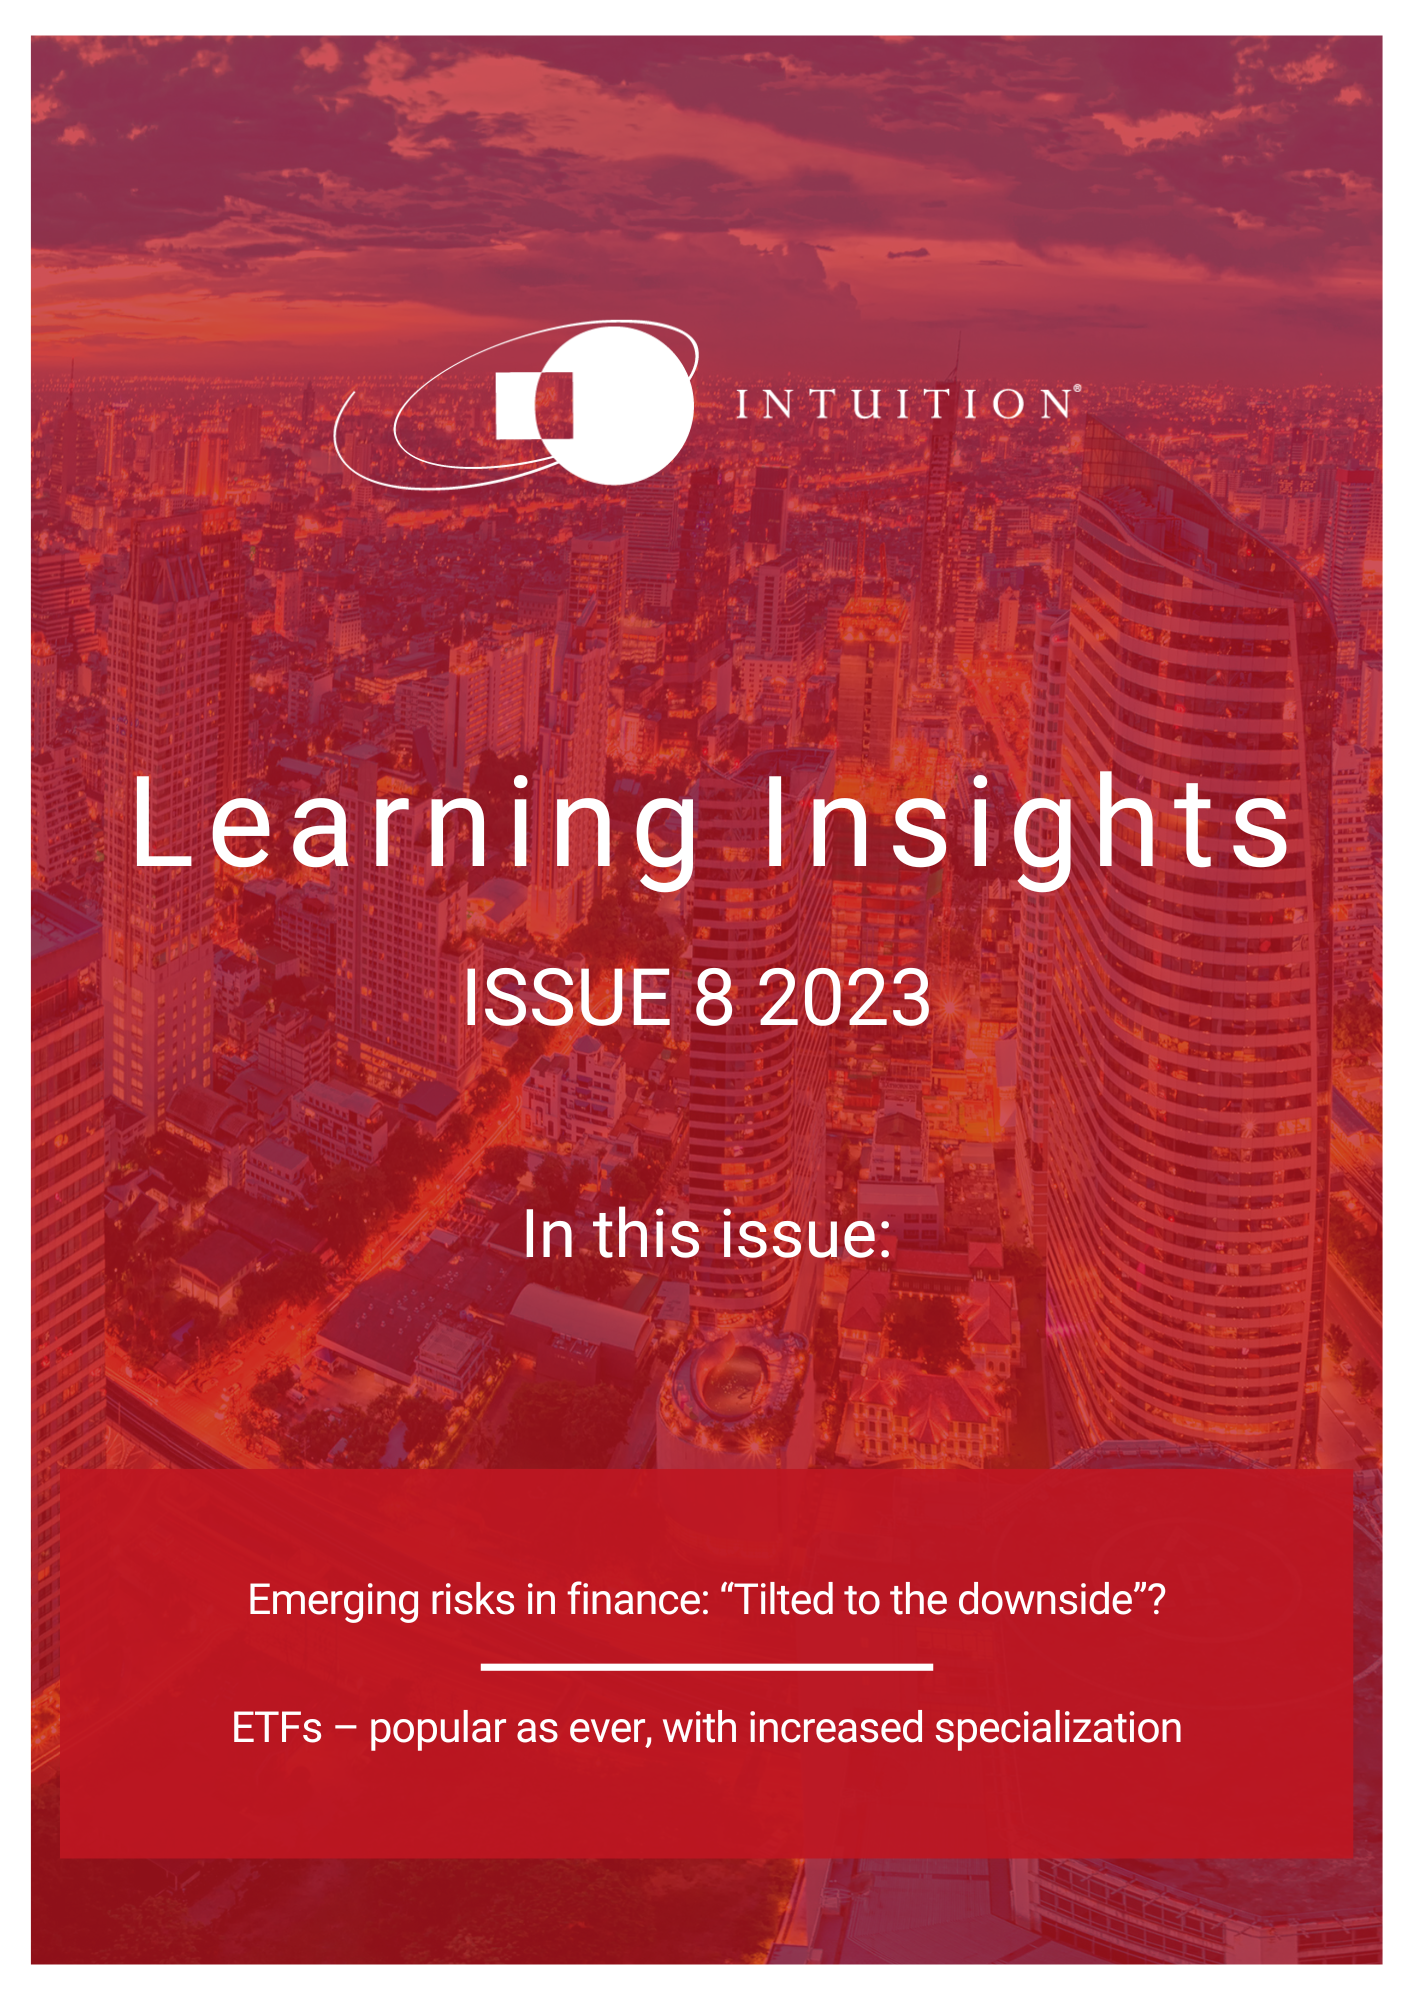 Learning Insights Issue 8 2023